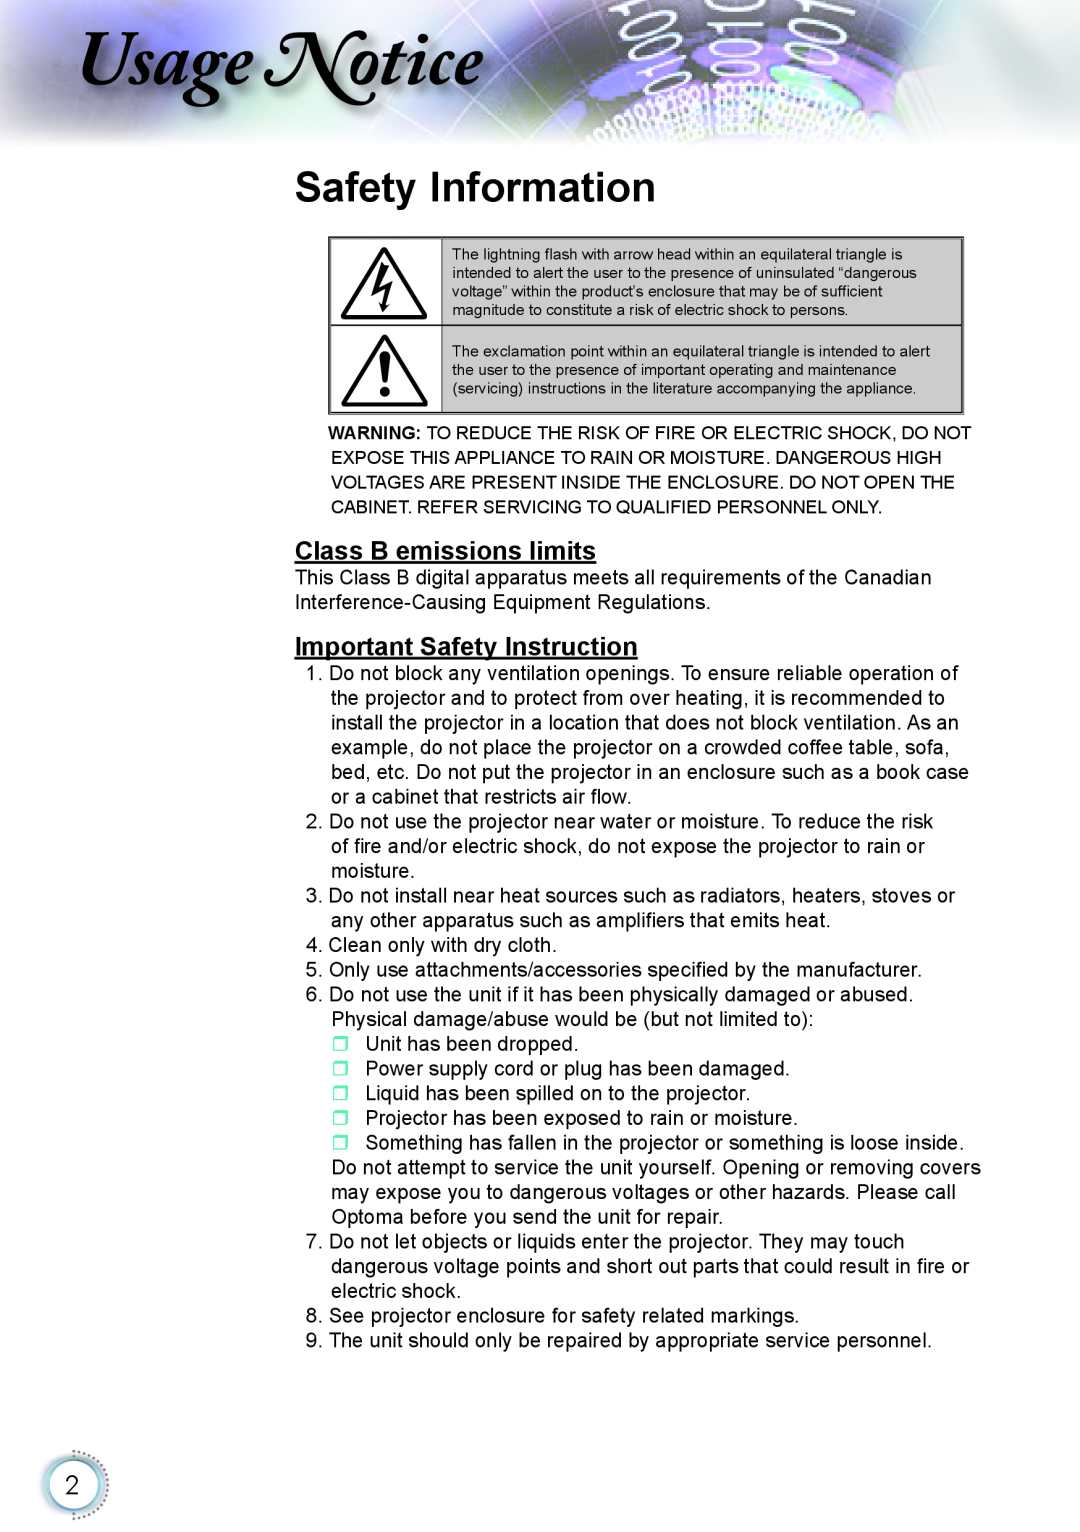 Optoma Technology HD20 manual sage otice, Safety Information, Class B emissions limits, Important Safety Instruction 